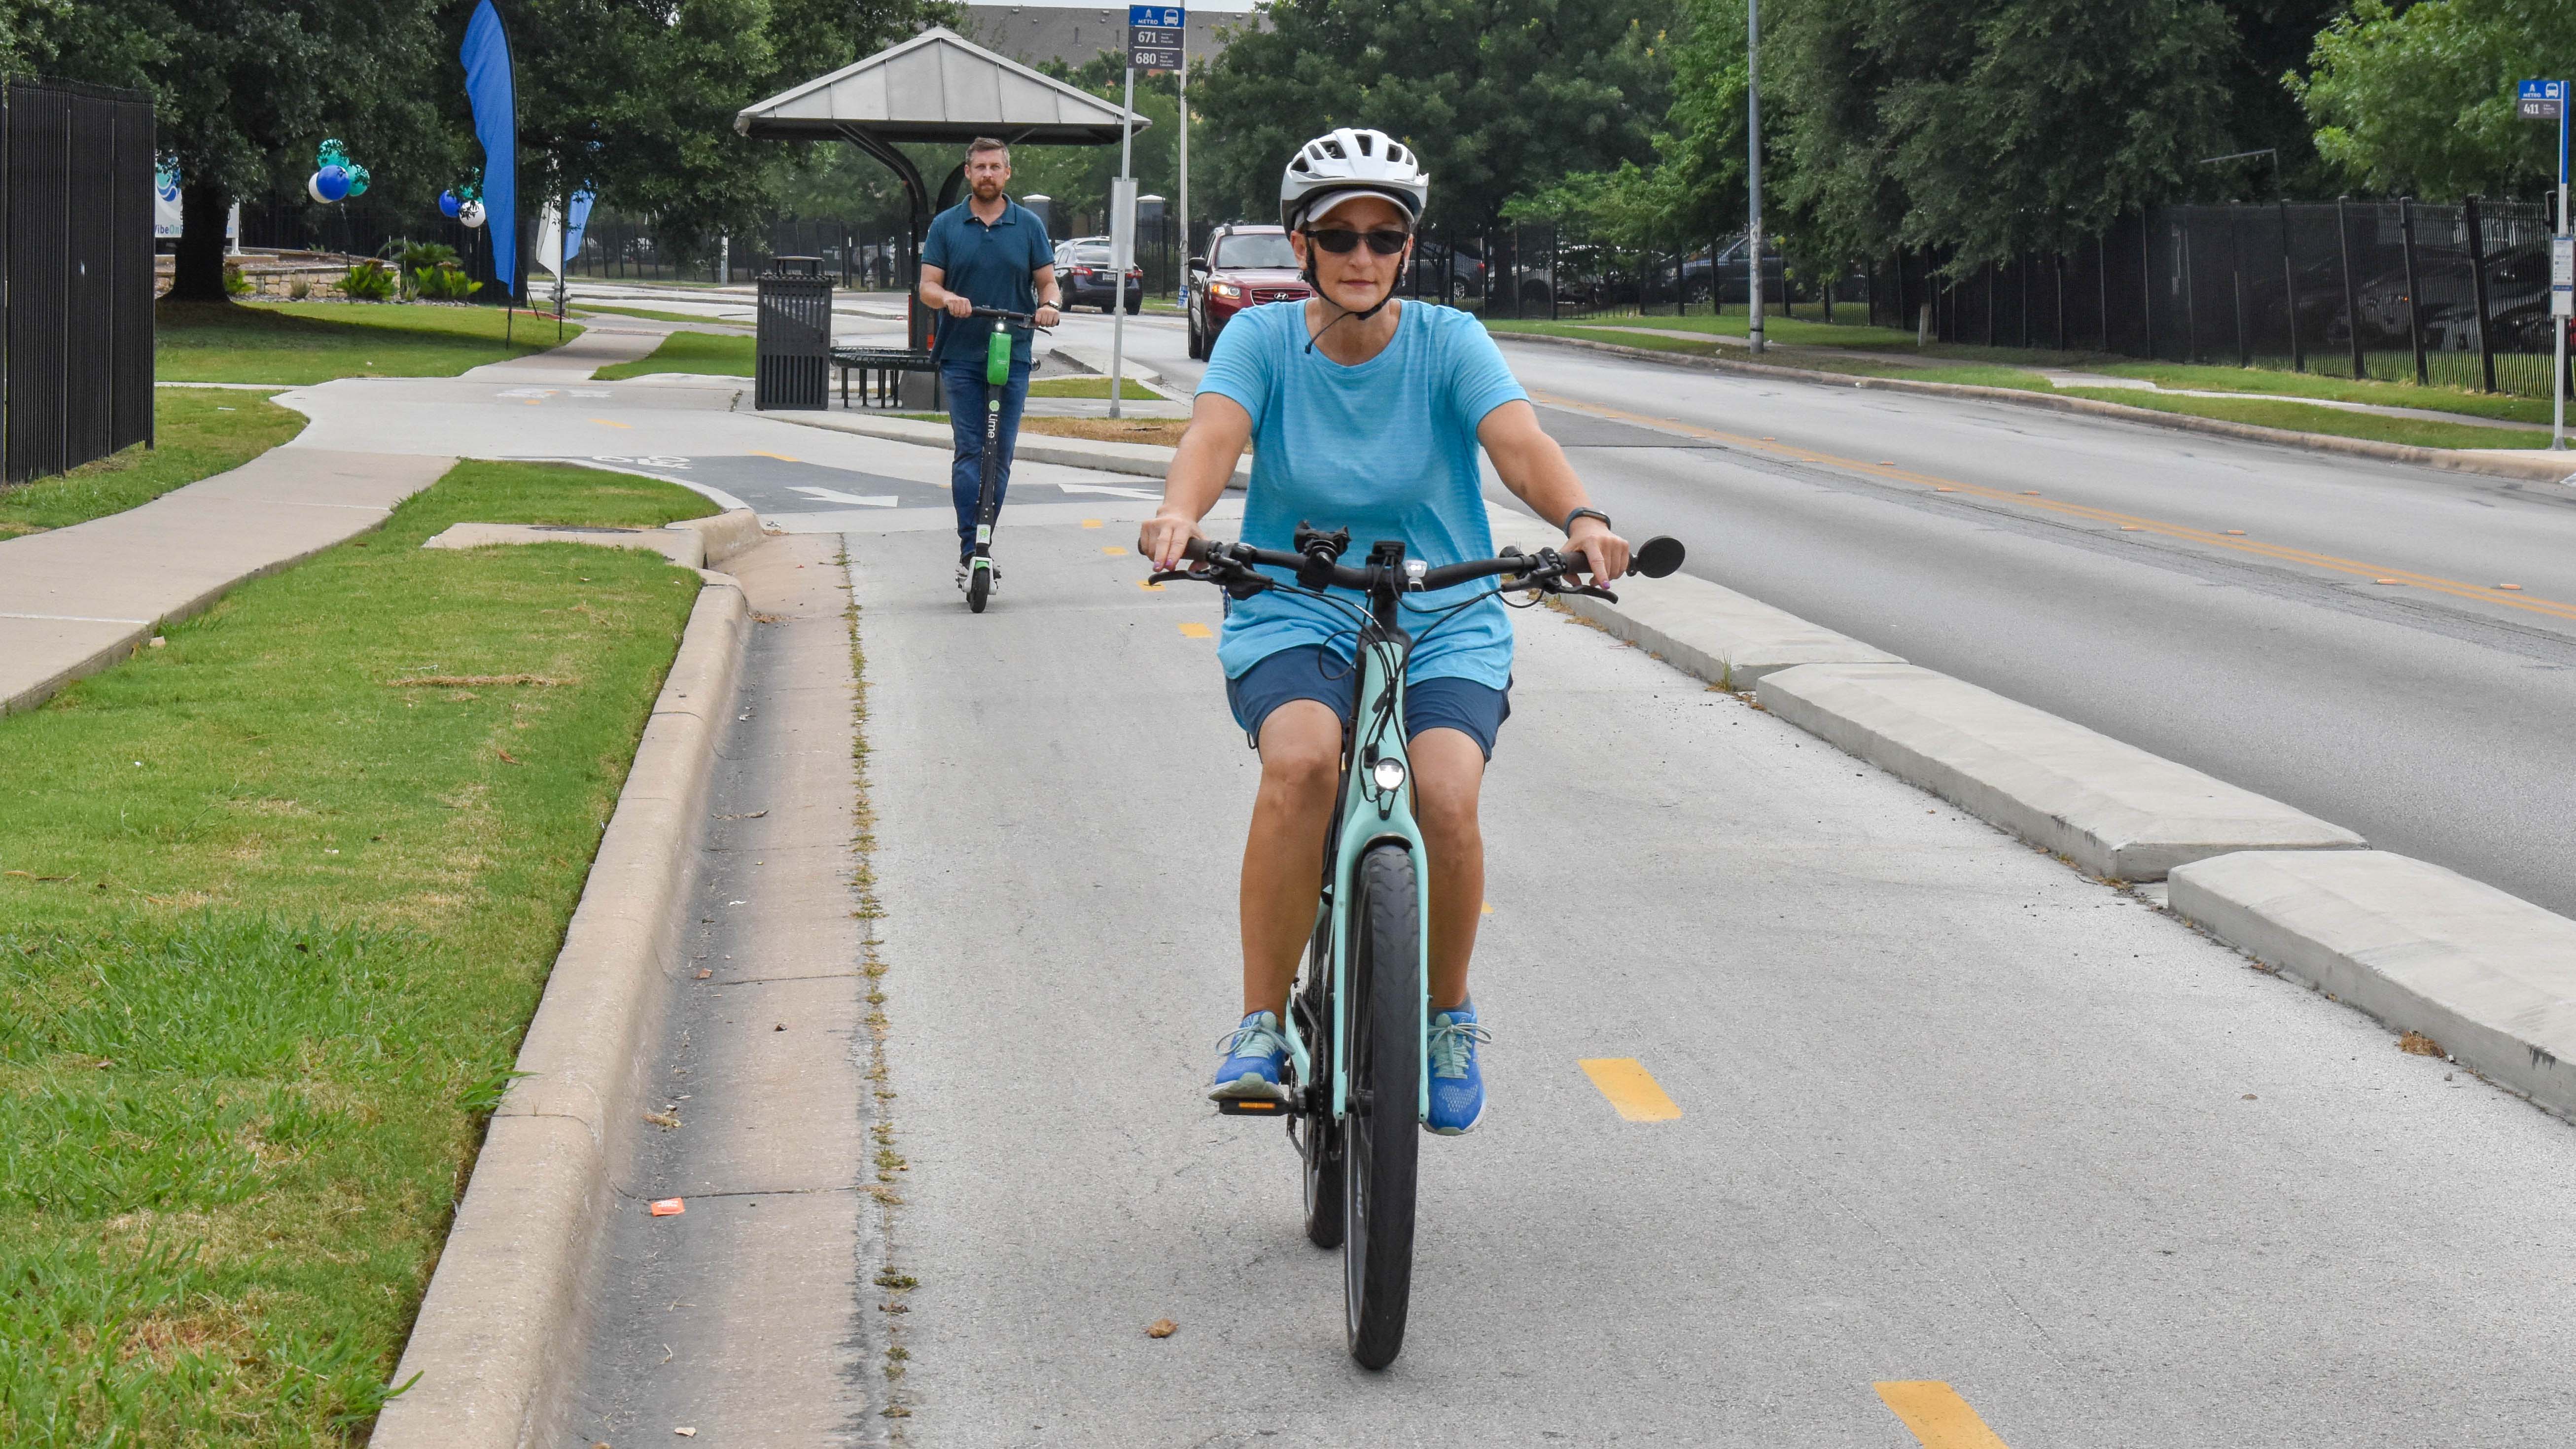 A bicyclist and scooter user utilize a protected lane on Wickersham Lane in southeast Austin.